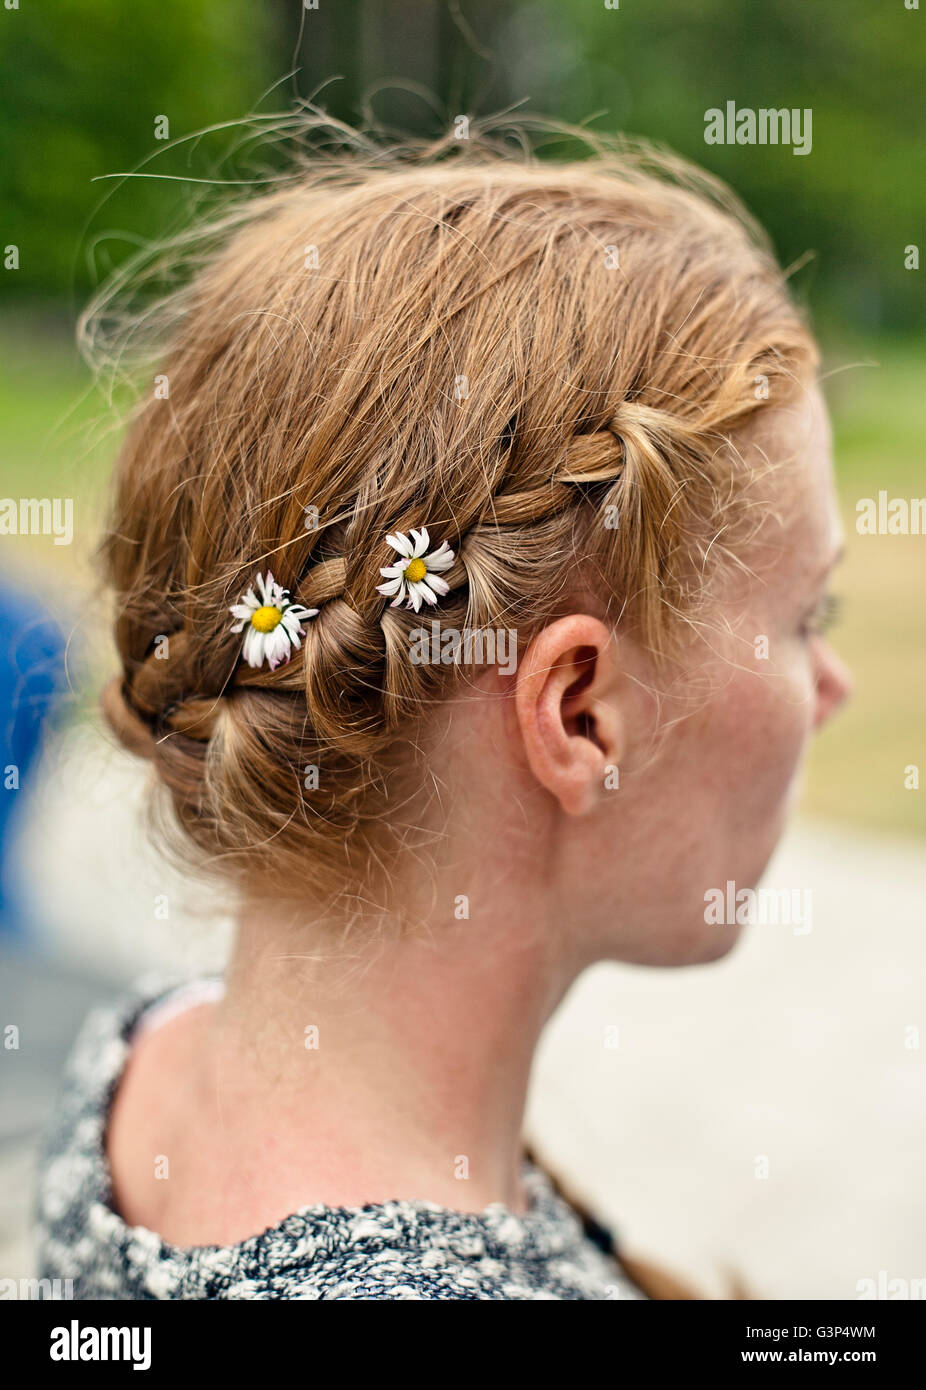 Sweden, Oland, Woman with braided hair Stock Photo